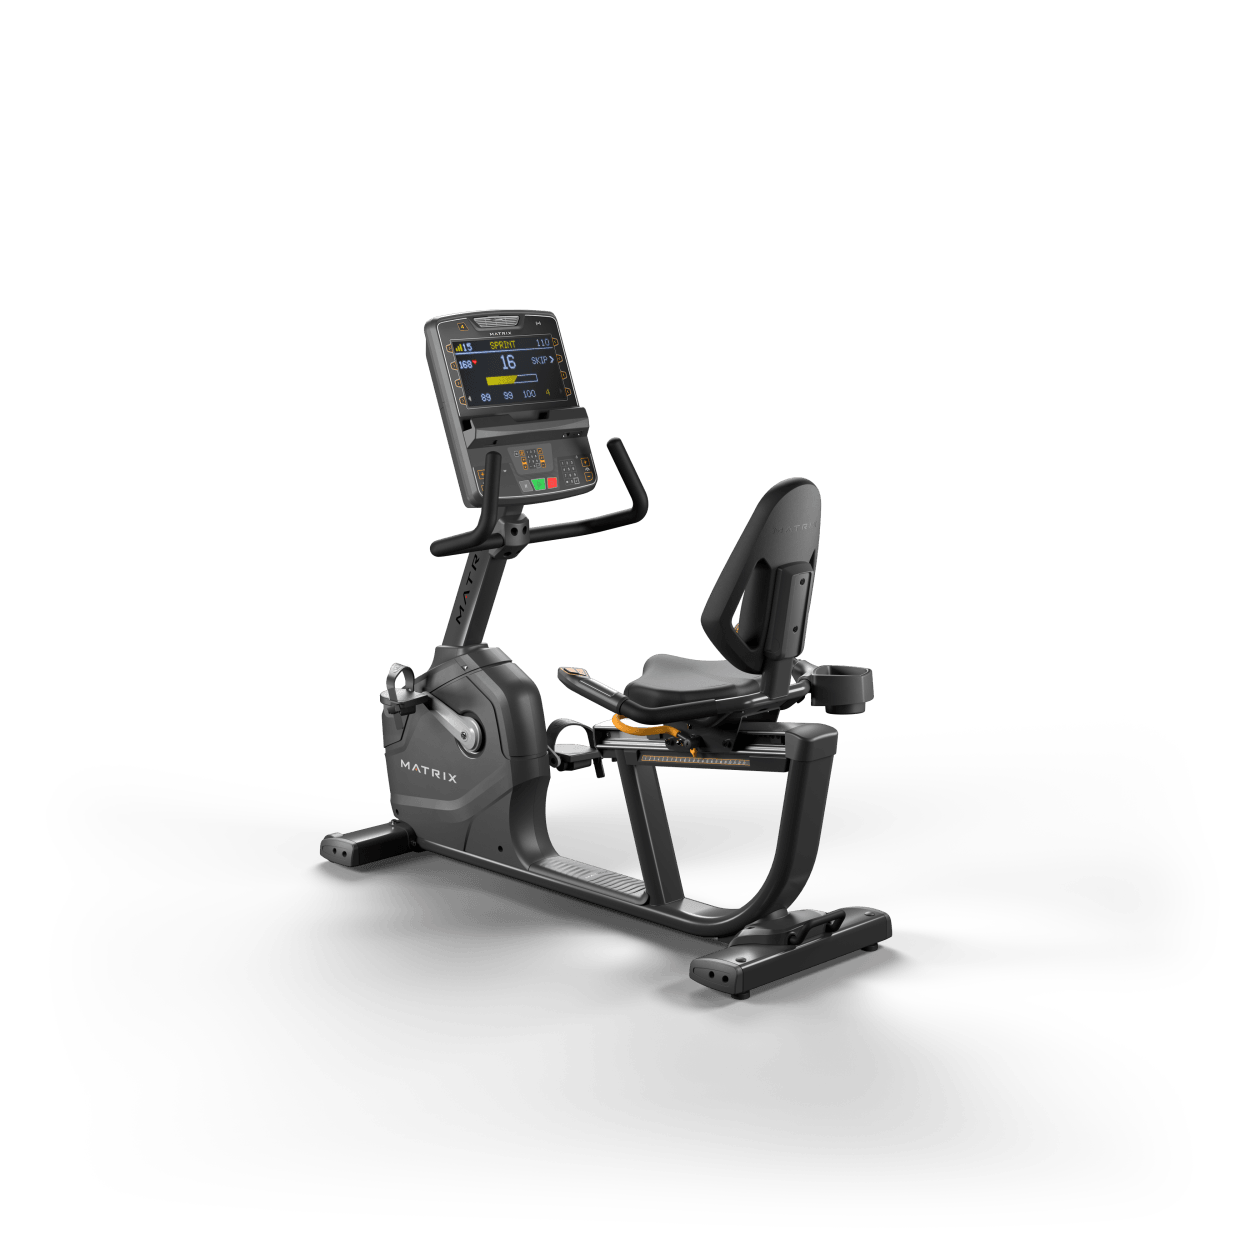 Matrix Fitness Edurance Recumbent Cycle with Premium LED Console full view | Fitness Experience